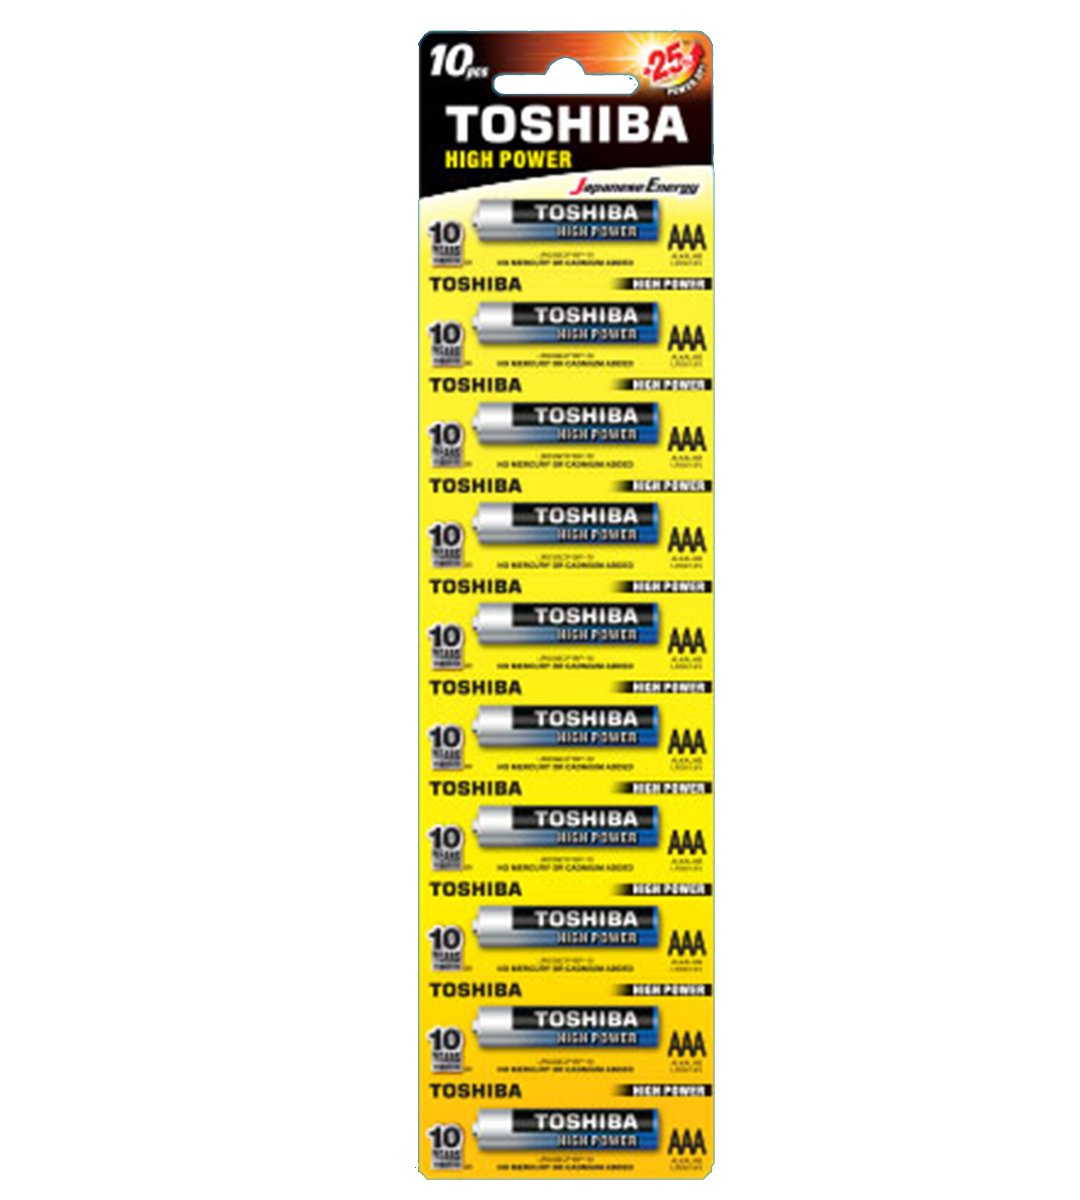 CR1616 Toshiba Lifestyle Products, Battery Products